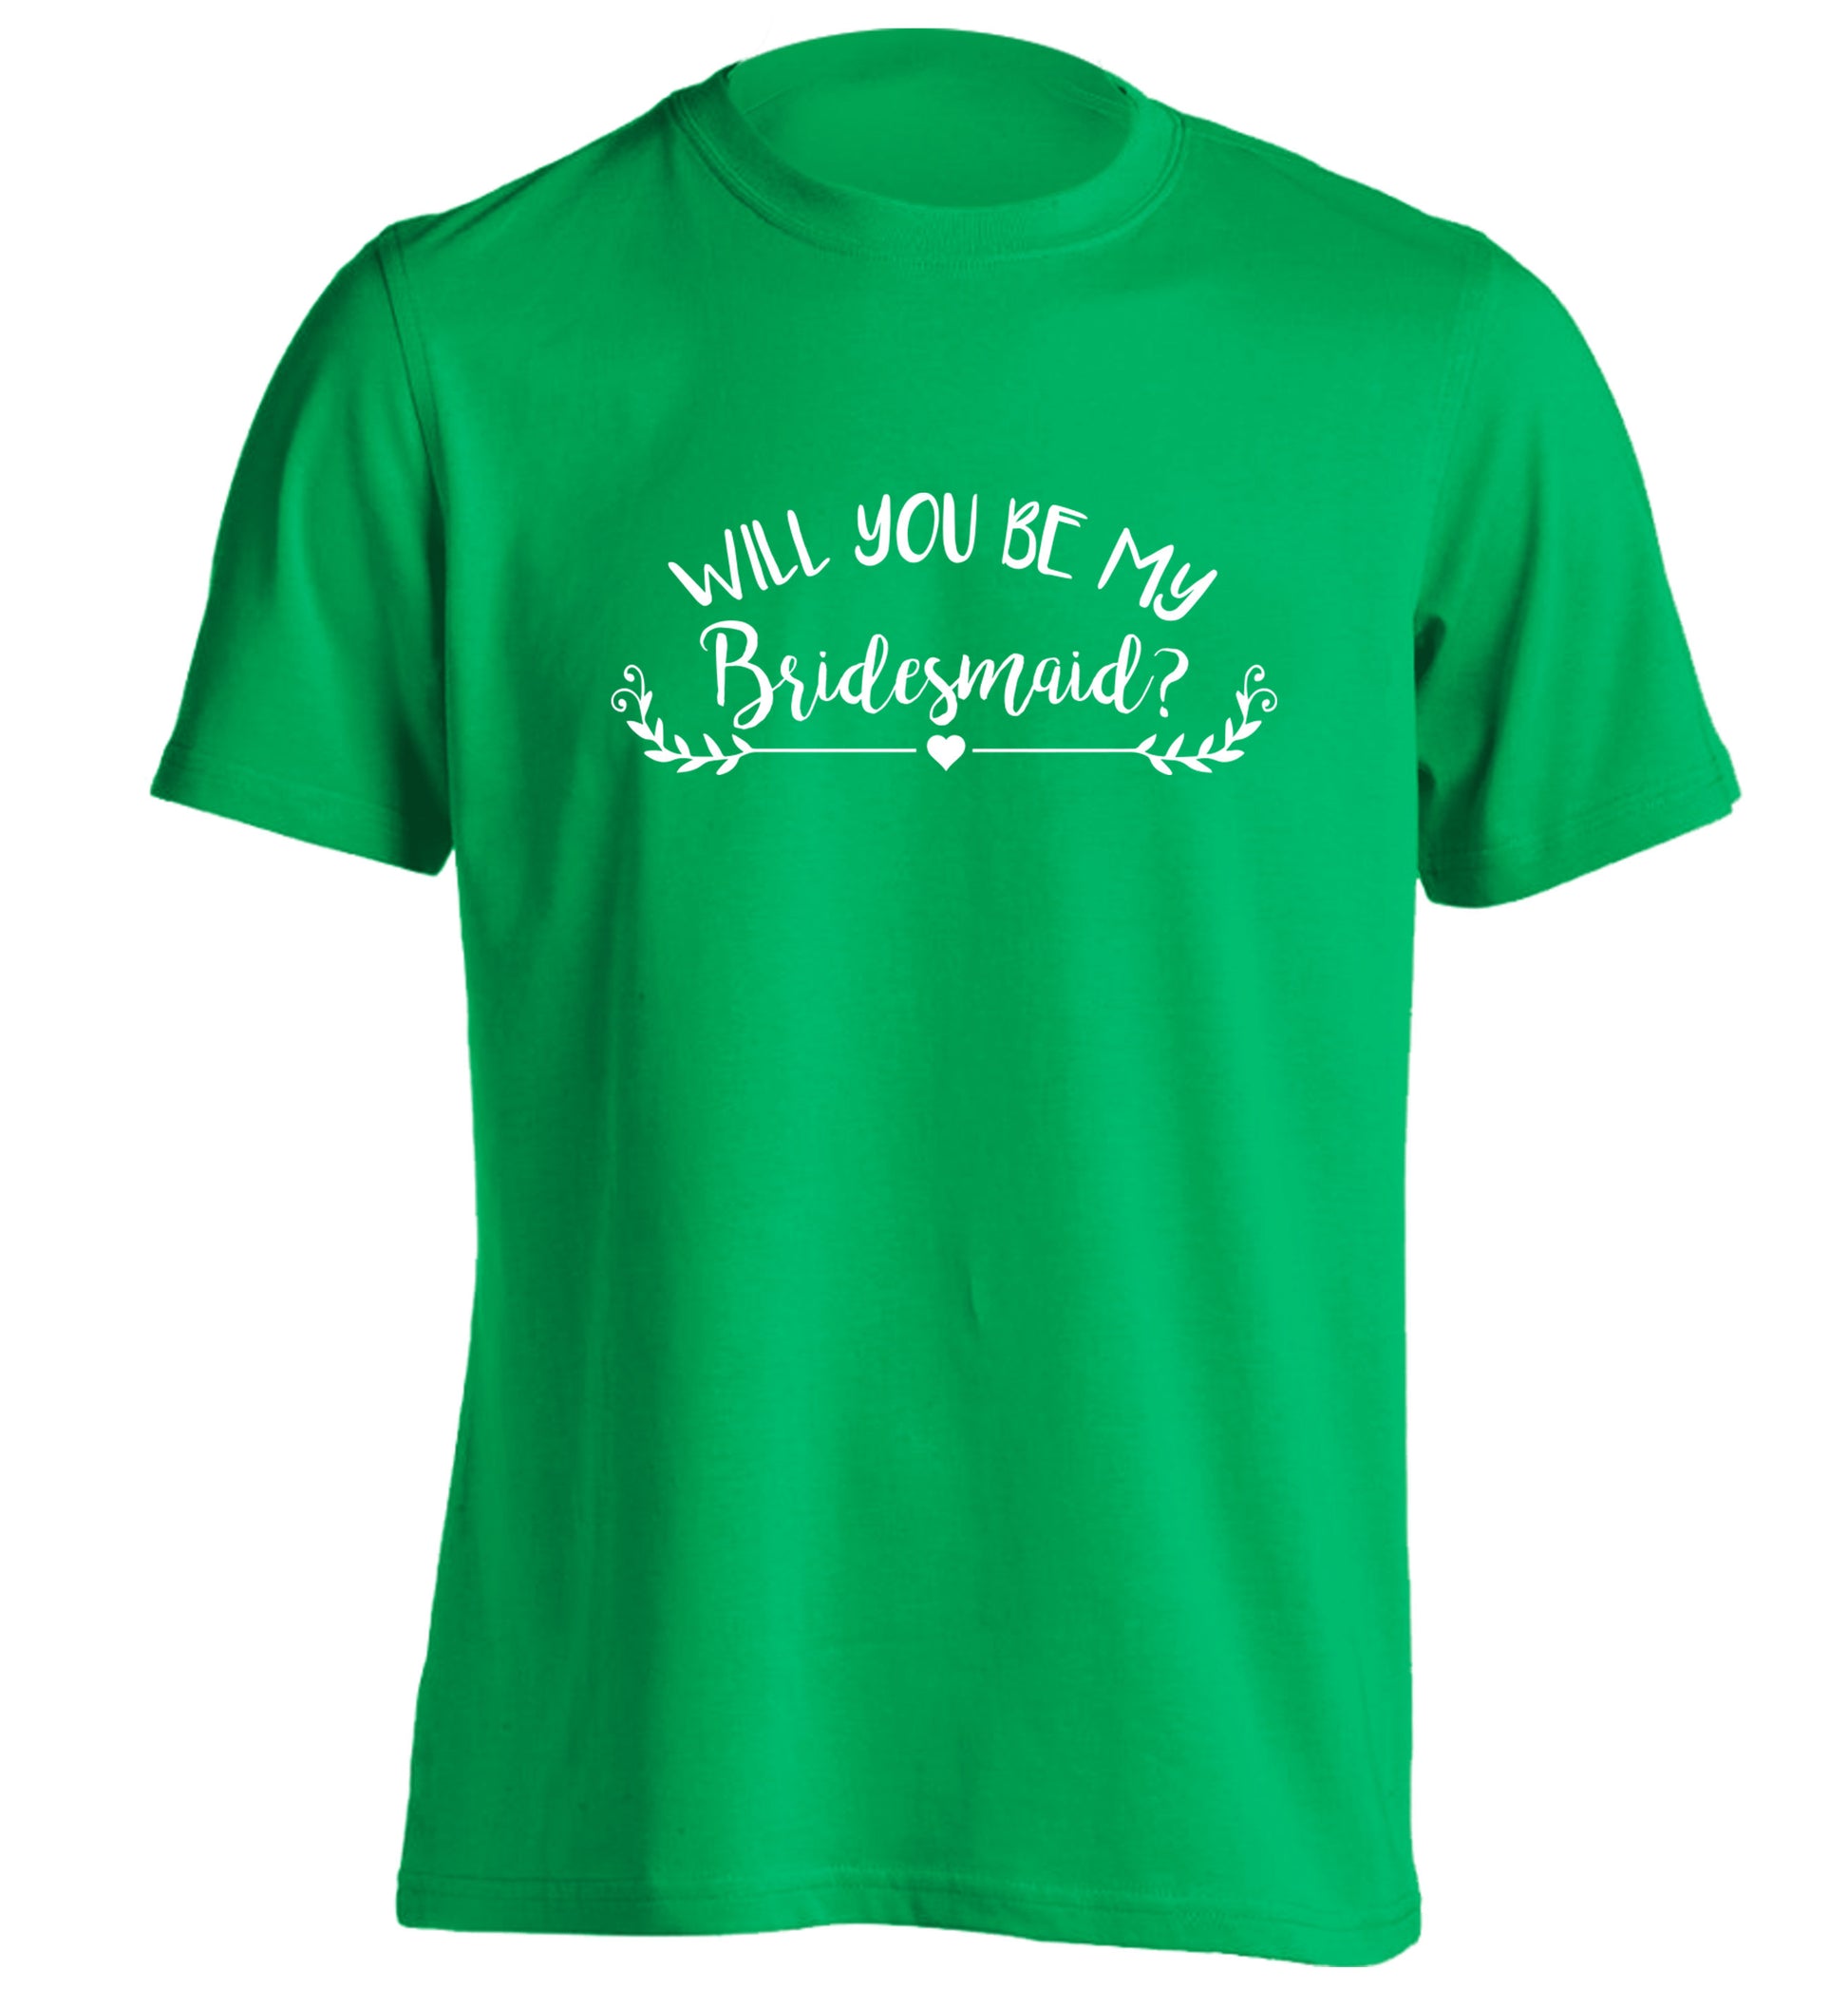 Will you be my bridesmaid? adults unisex green Tshirt 2XL